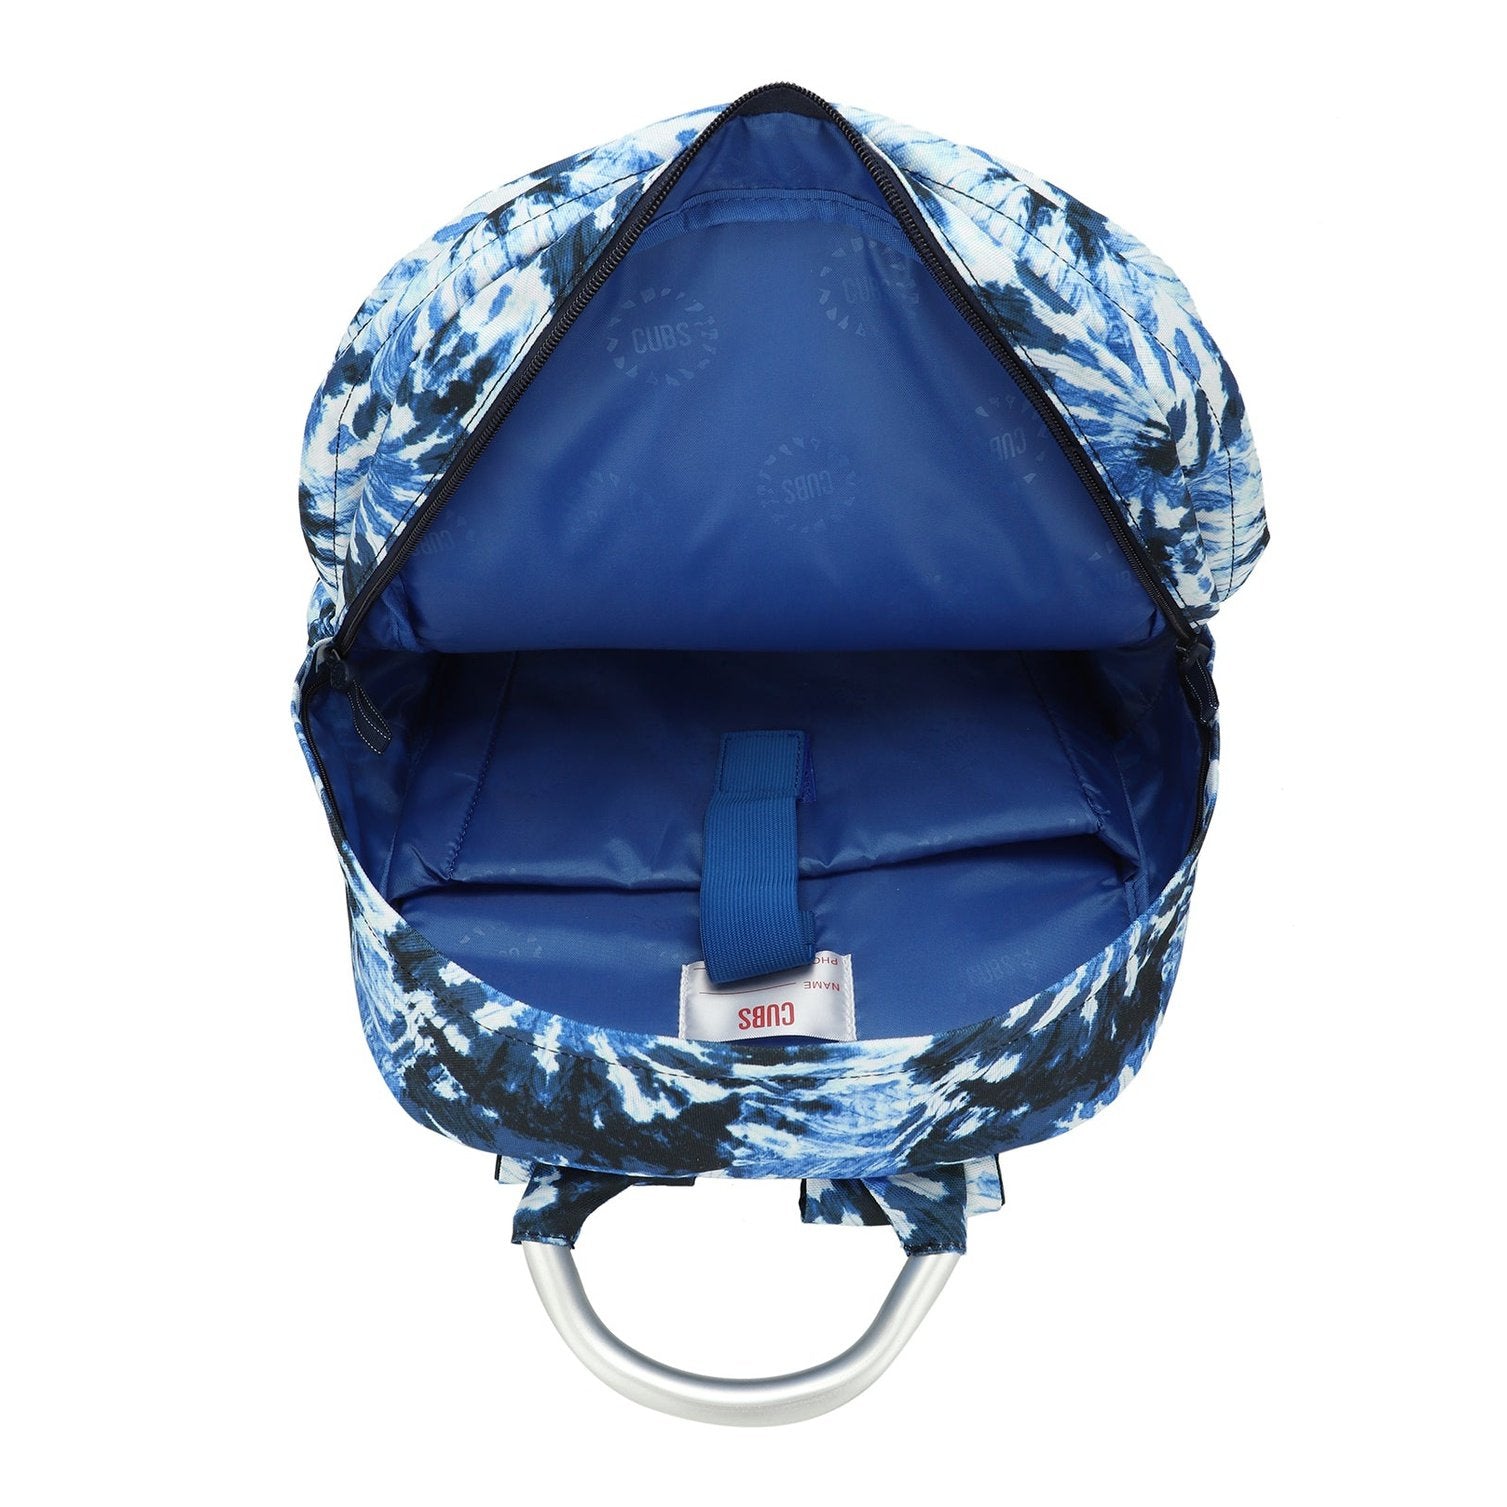 All the Blues Tie Dye Backpack